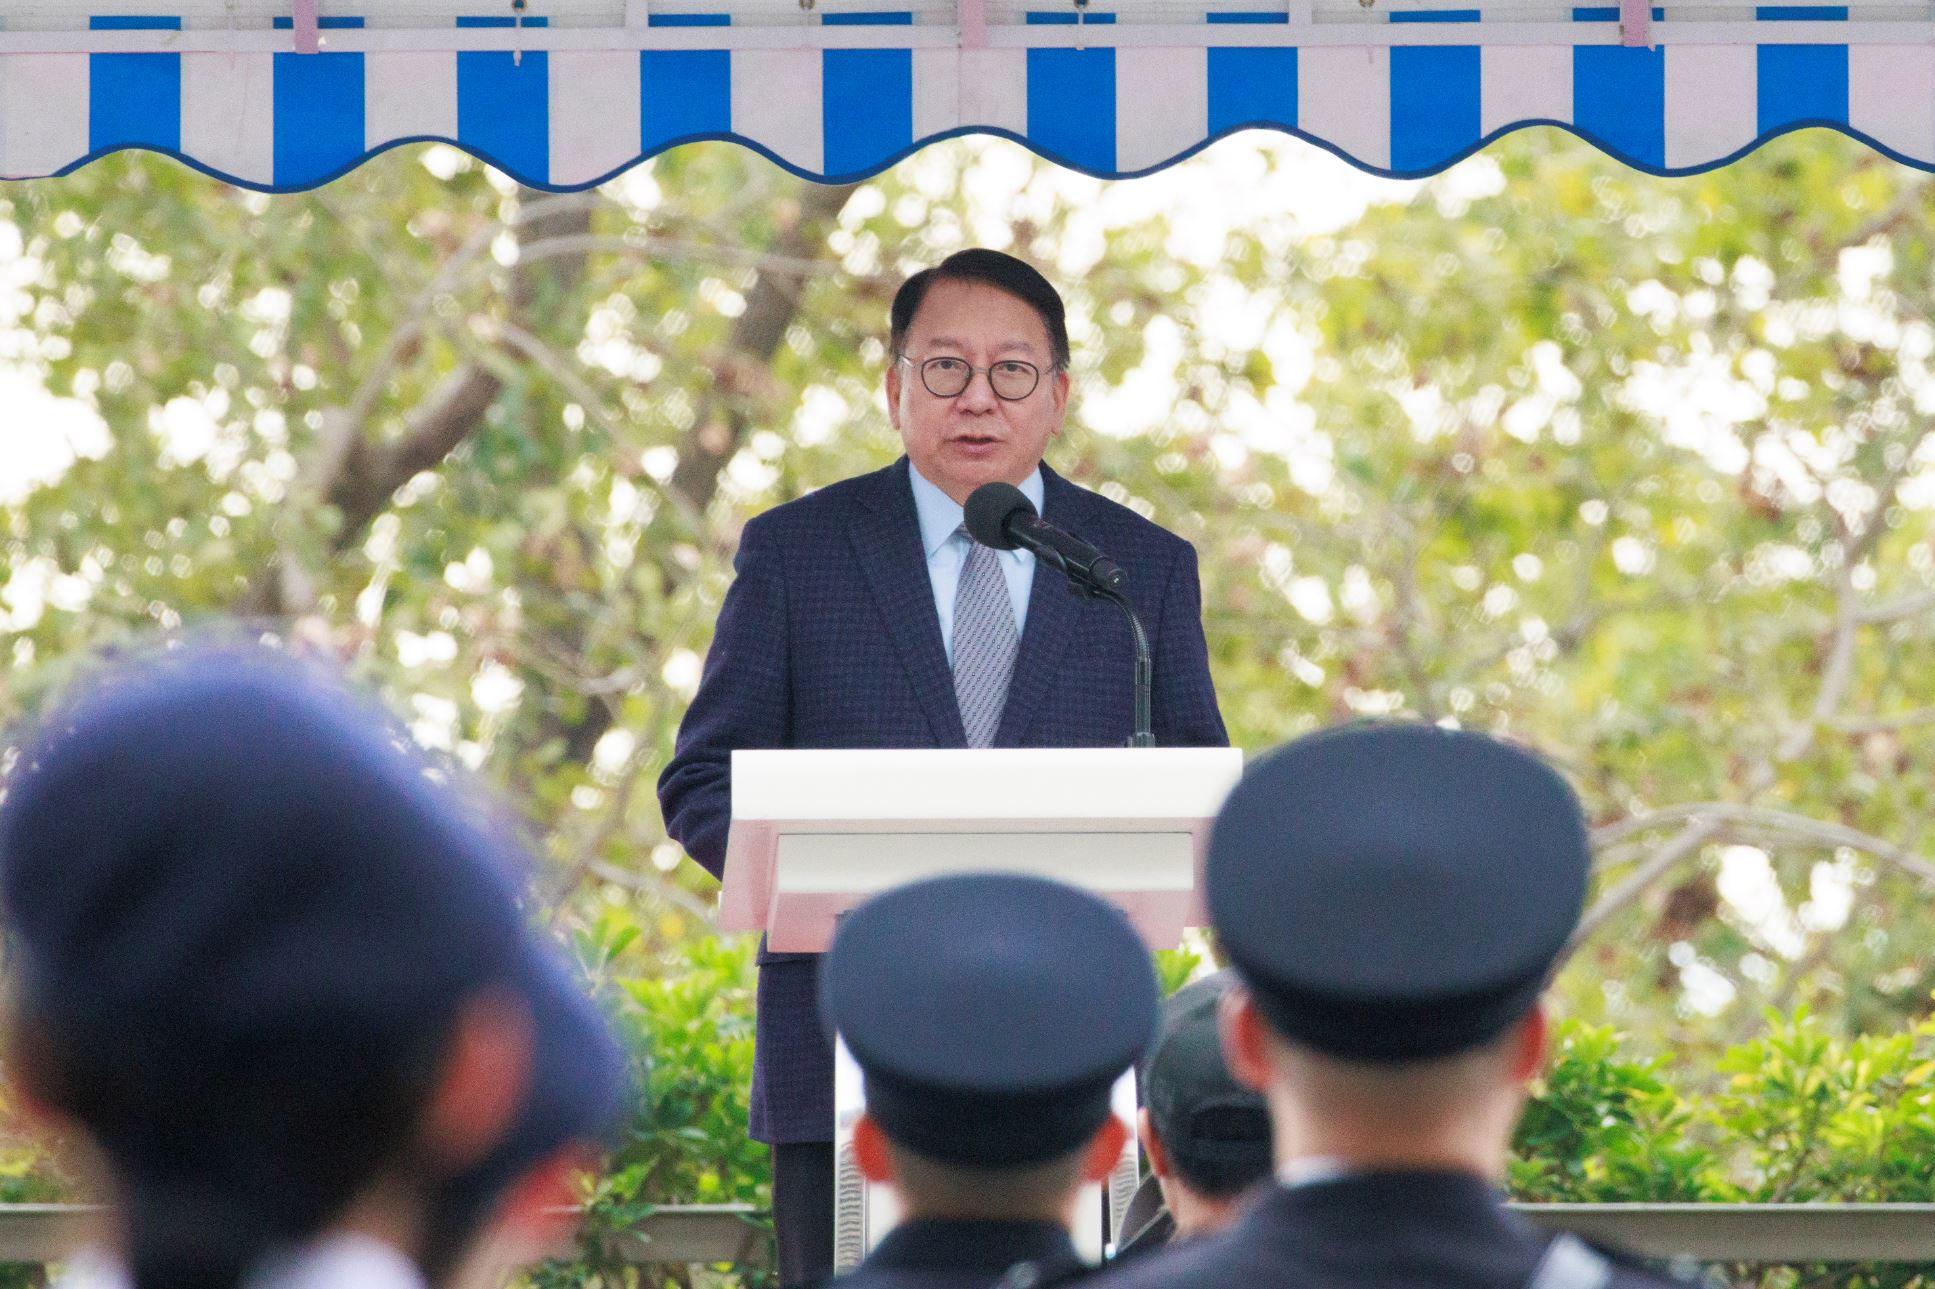 The Chief Secretary for Administration, Mr Chan Kwok-ki, delivers a speech at the Immigration Department Youth Leaders Corps 10th Anniversary Grand Parade today (December 29).